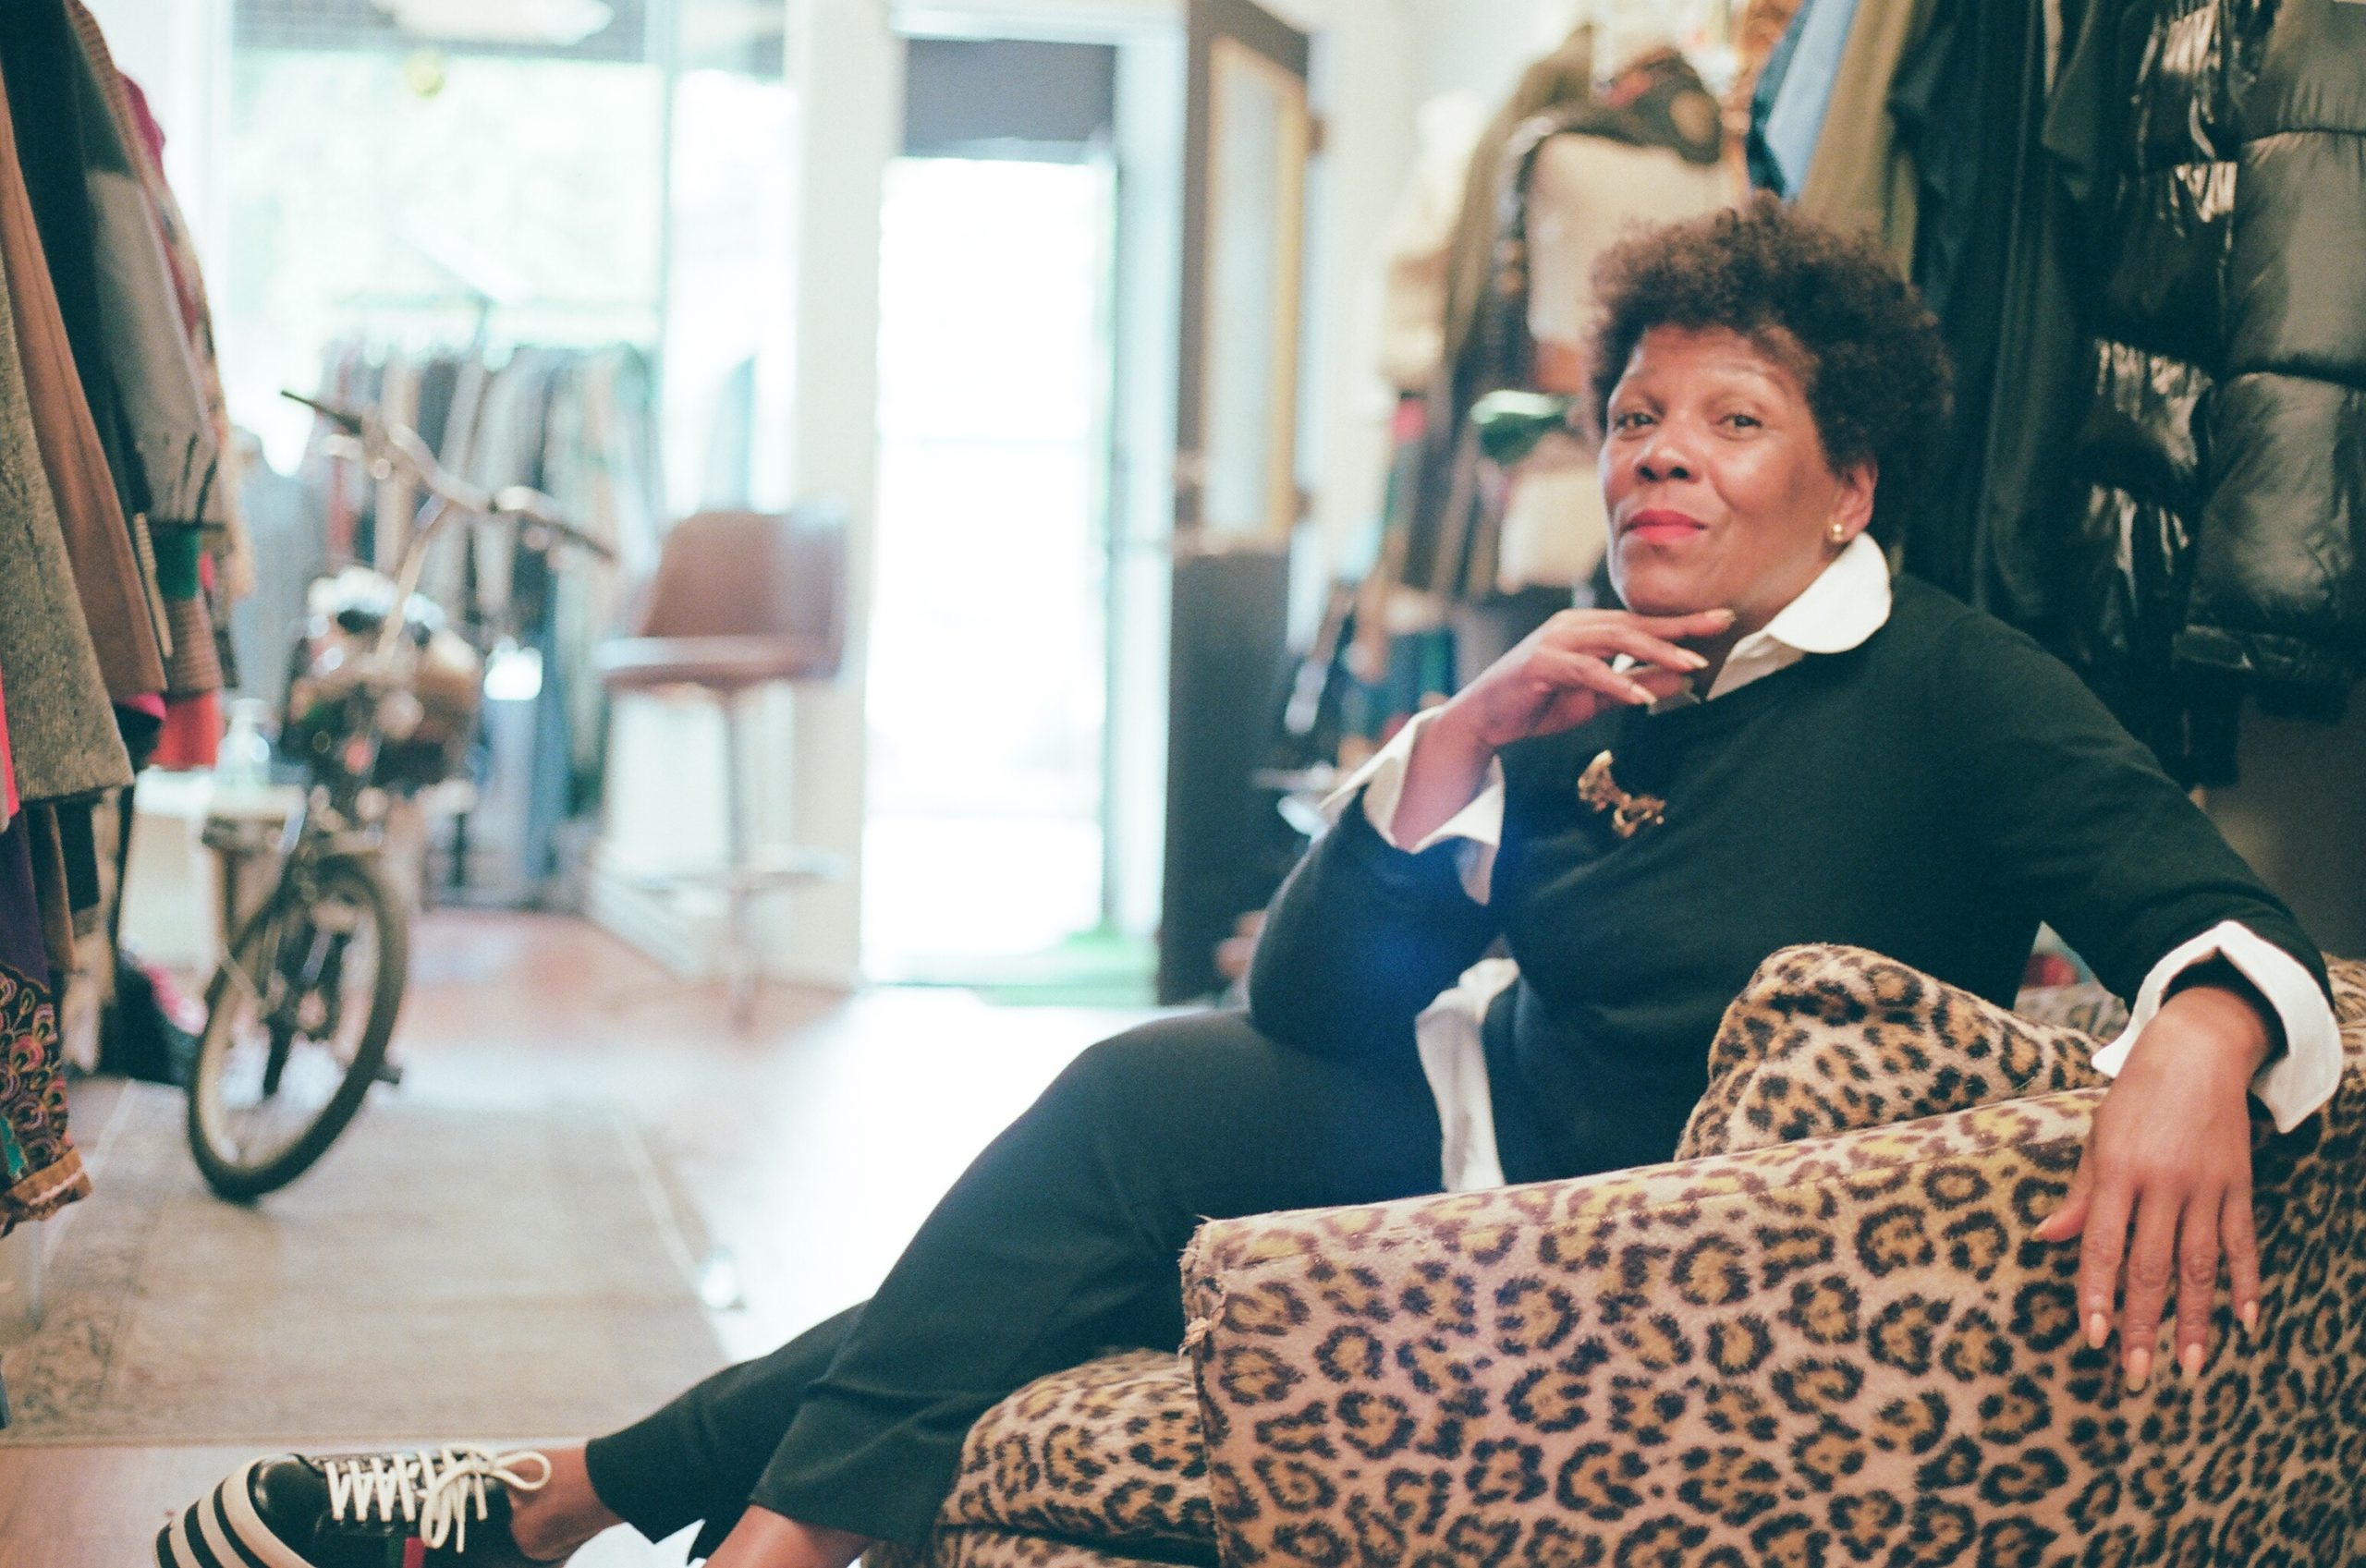 Featured image: A photo of Gilda Norris at Gilda Designer Thrift Boutique. She is sitting on a leopard-print chair wearing a black and white outfit. She wears tall platformed sneakers with stripes and a gold broach. All around her are various designer garments. She looks directly at the camera with one hand raised up to her chin. Photo by zakkiyyah najeebah dumas-o'neal.